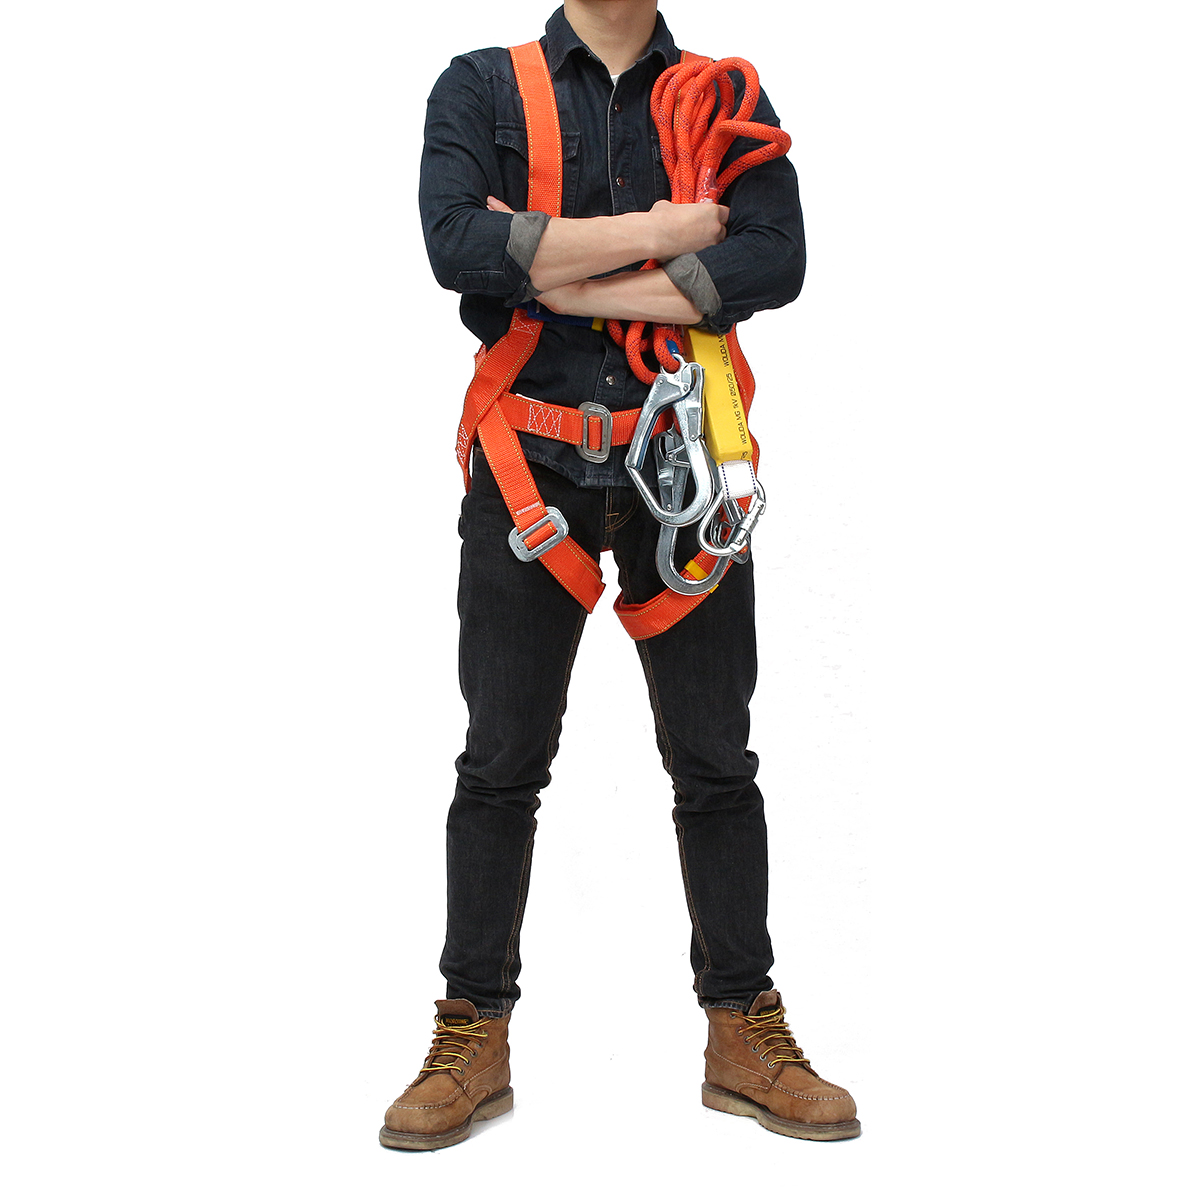 Outdoor-Full-Body-Climbing-Safety-Belt-Rescue-Rappelling-Aloft-Work-Suspension-Strap-Harness-1132532-7